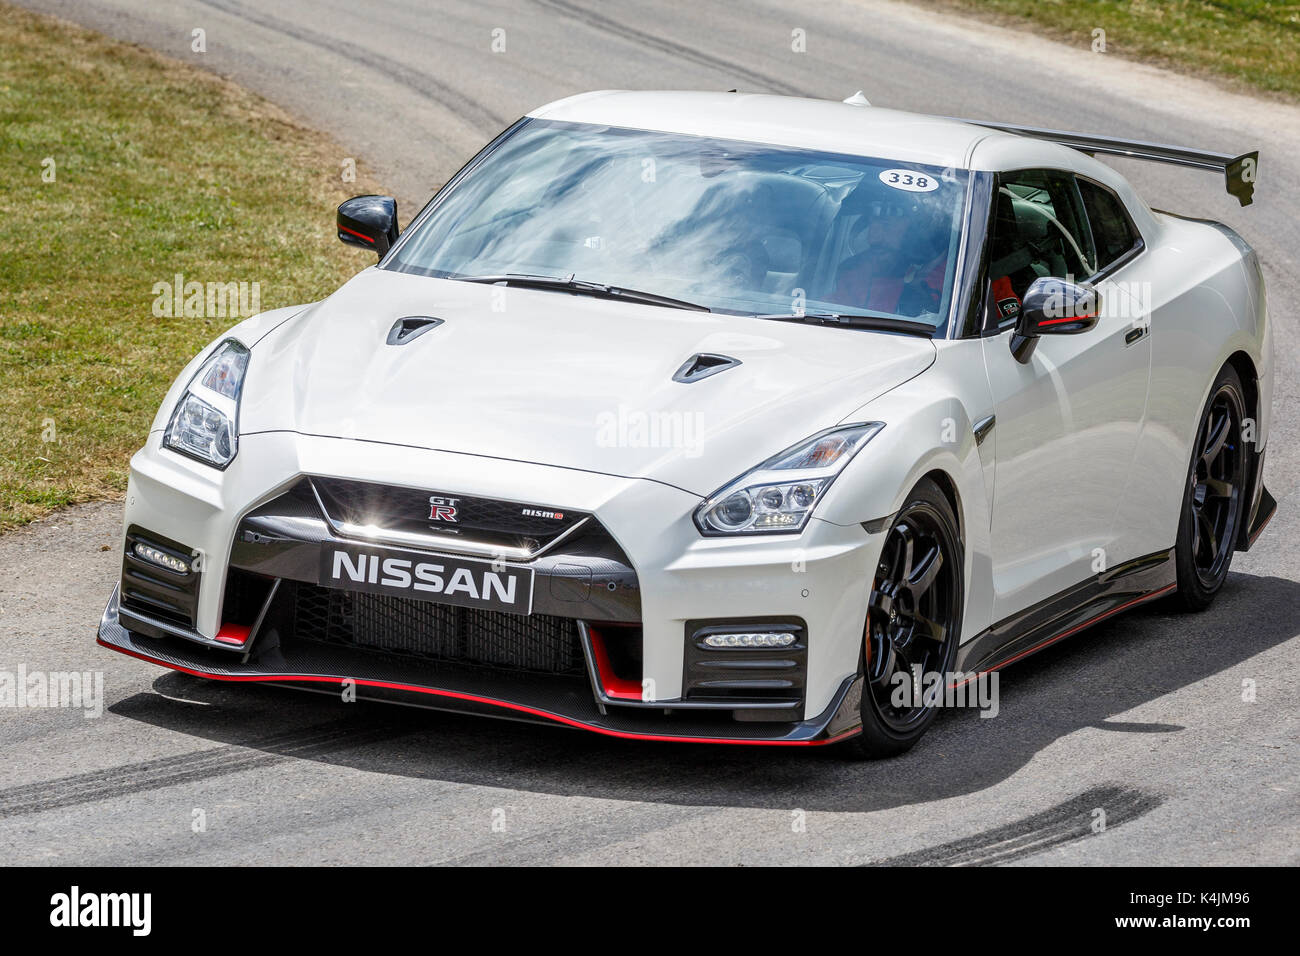 2017 Nissan GT-R at the 2017 Goodwood Festival of Speed, Sussex, UK. Stock Photo